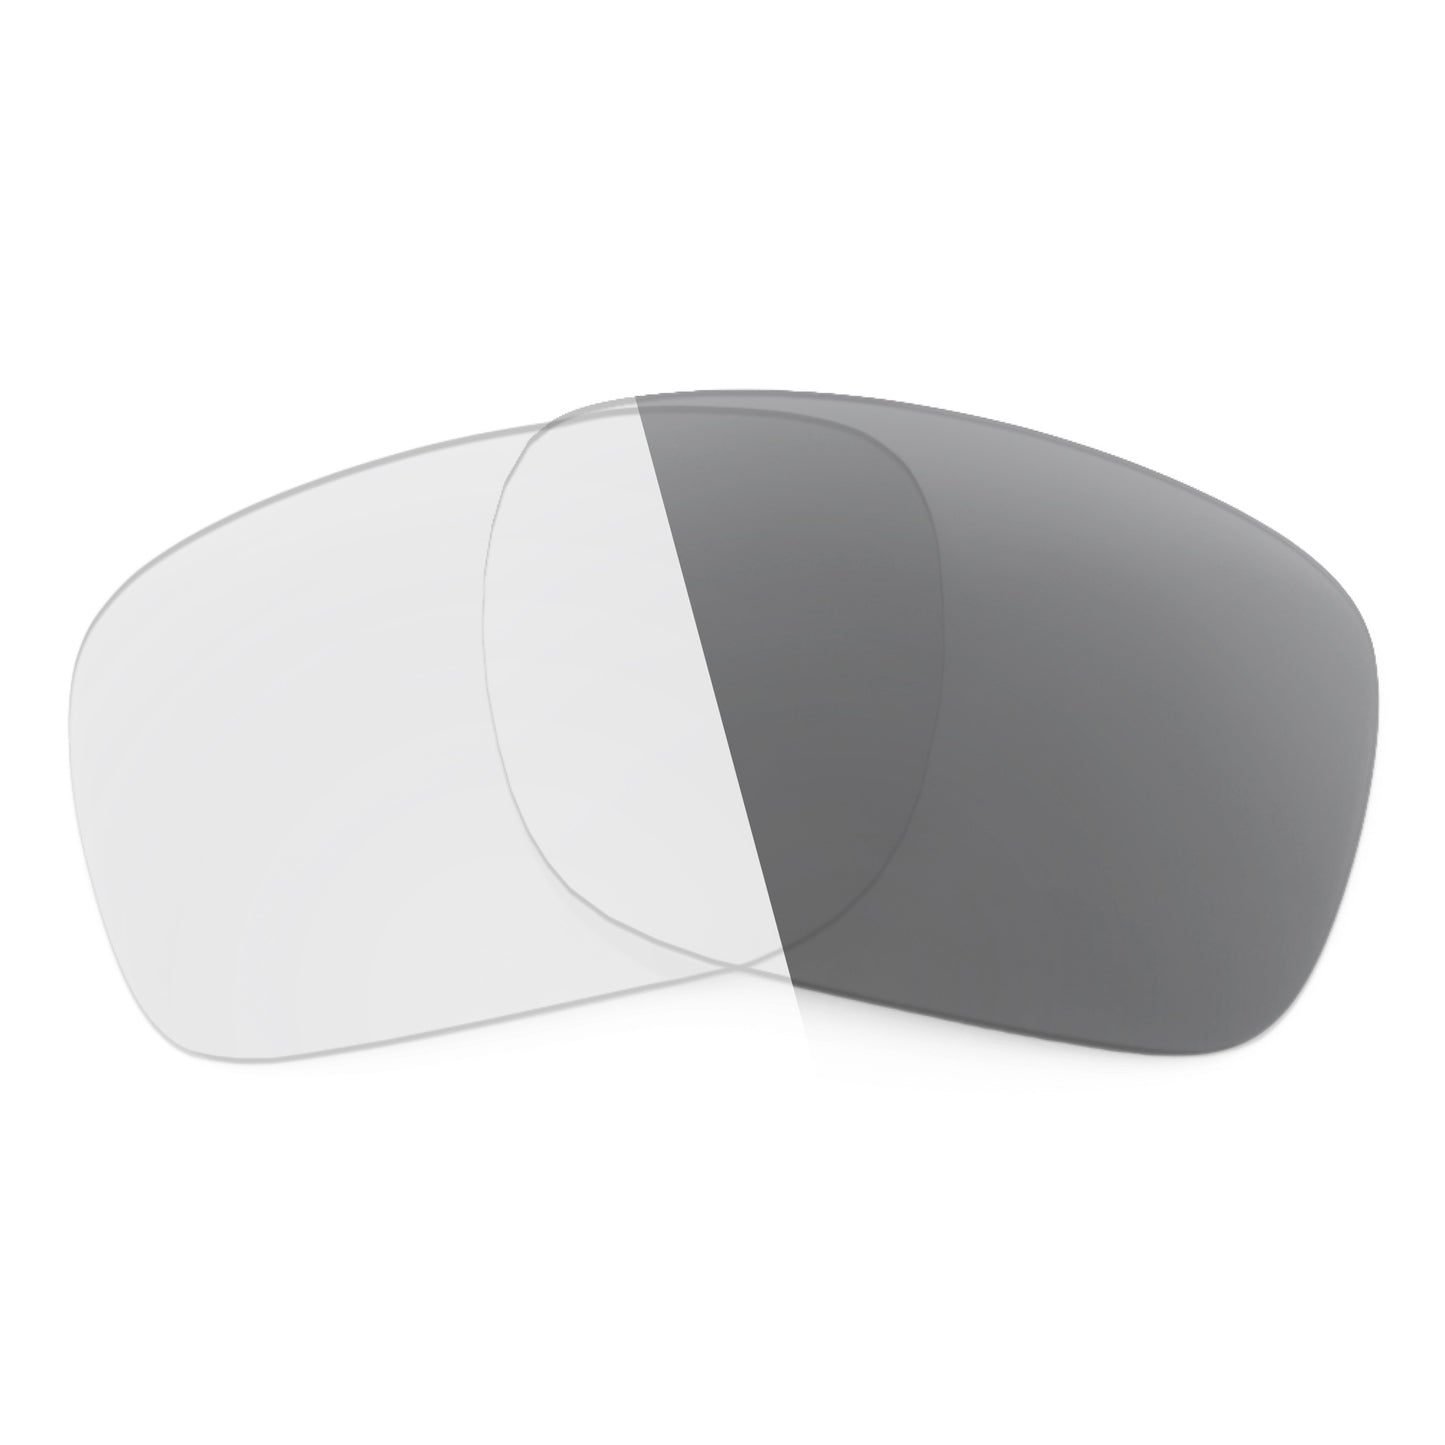 Revant replacement lenses for Ray-Ban Nomad RB2187 54mm Non-Polarized Adapt Gray Photochromic